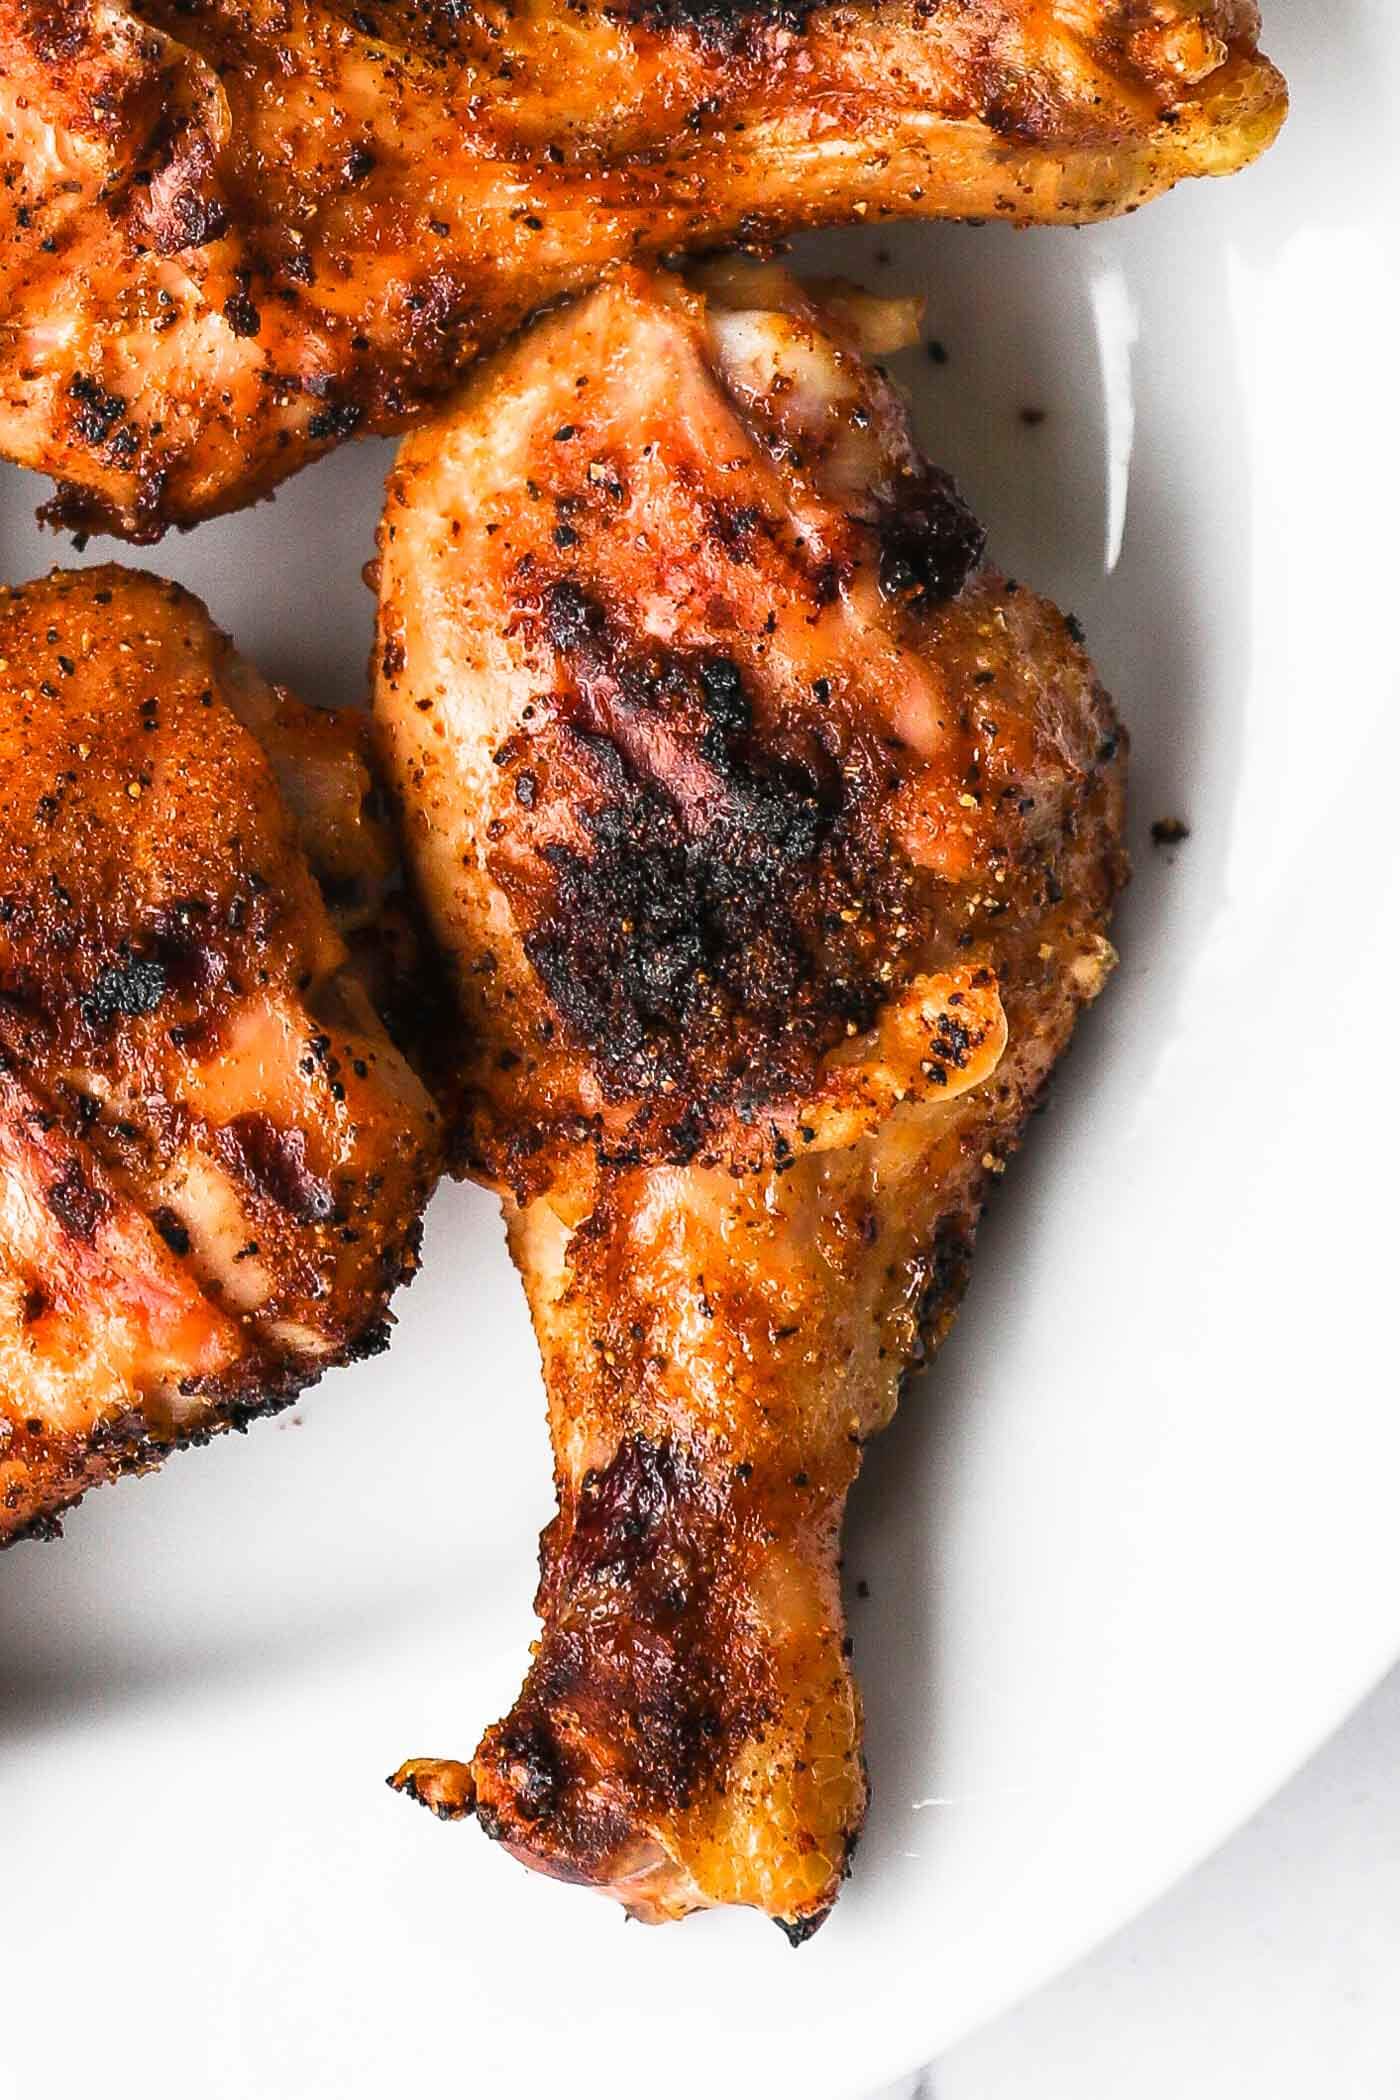 Best Dry Rub for Grilled Chicken - How to Season Grilled Chicken